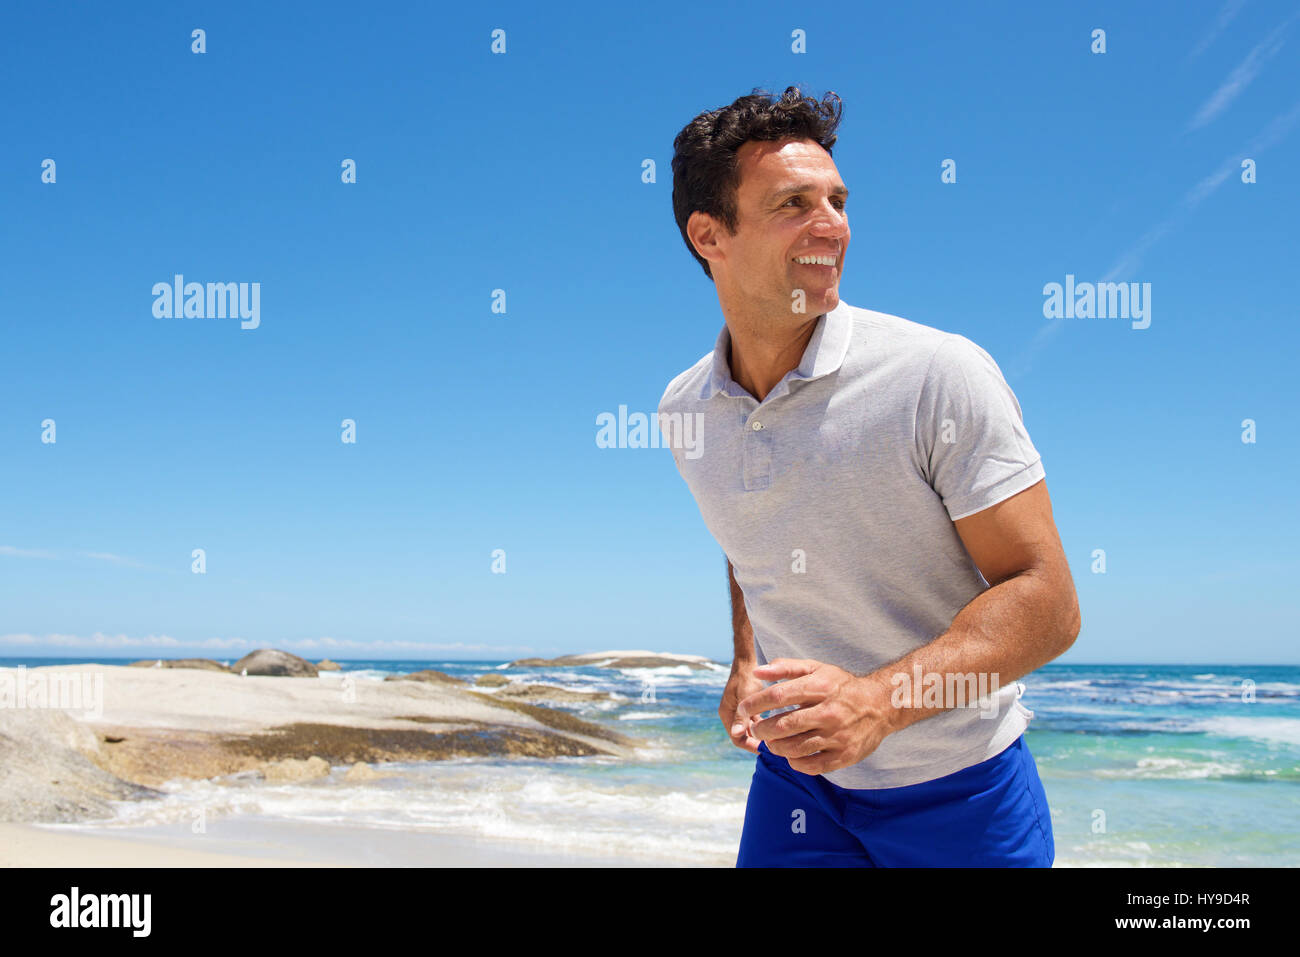 Portrait of a happy middle aged man walking on the beach Banque D'Images